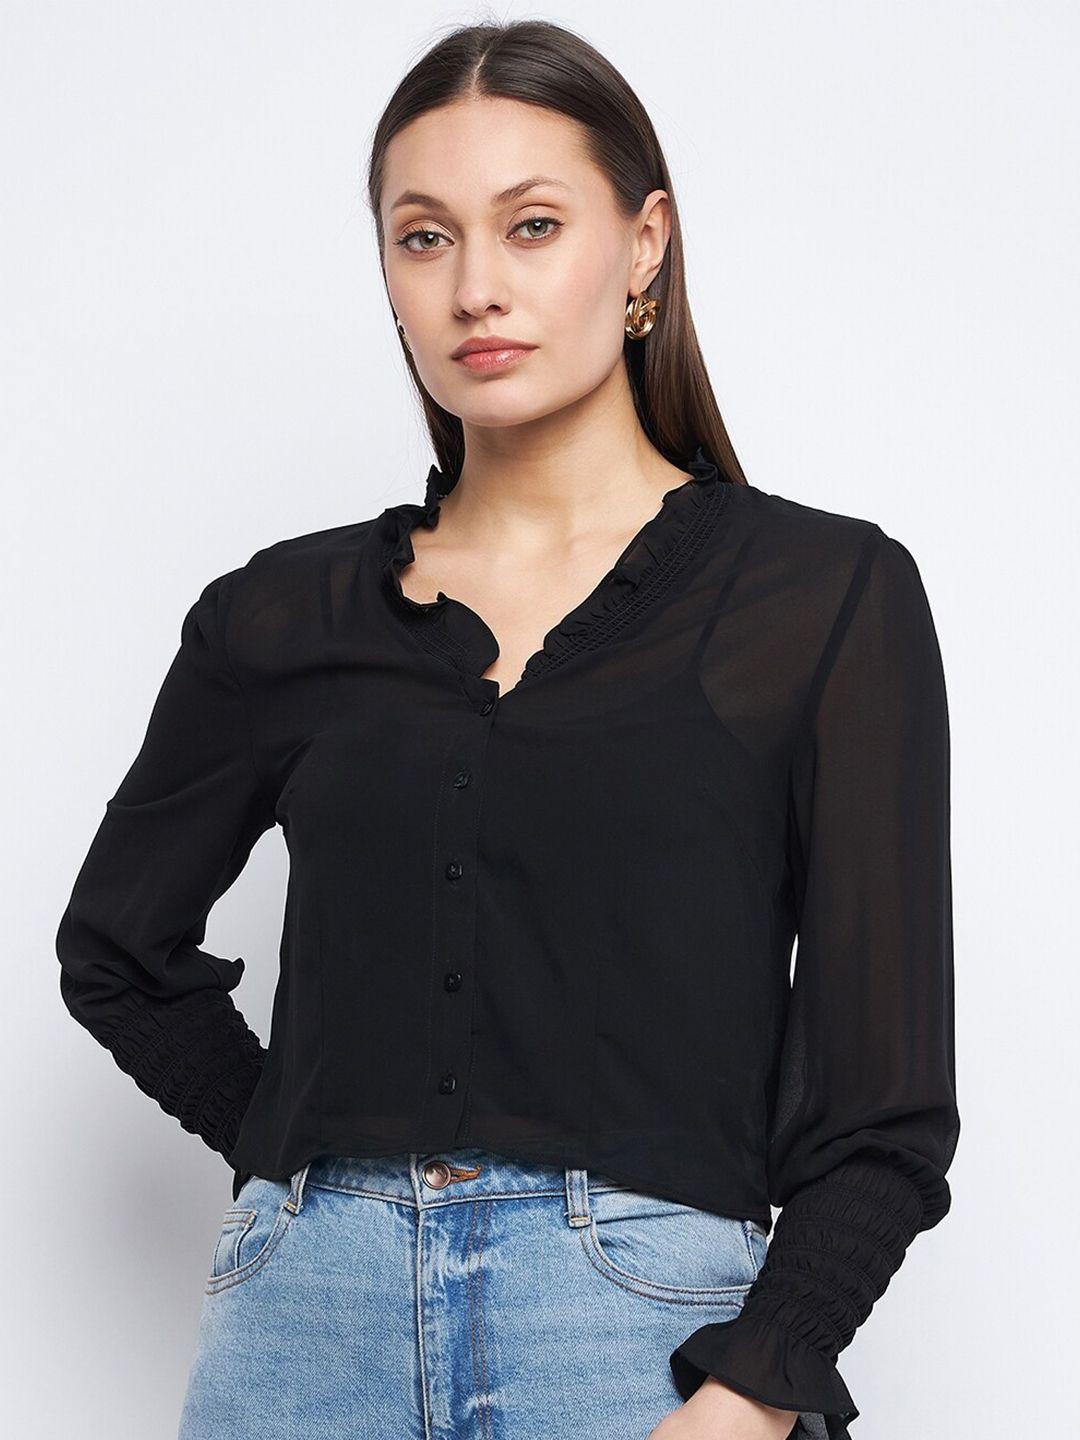 madame-v-neck-cuffed-sleeves-ruffles-detail-shirt-style-top